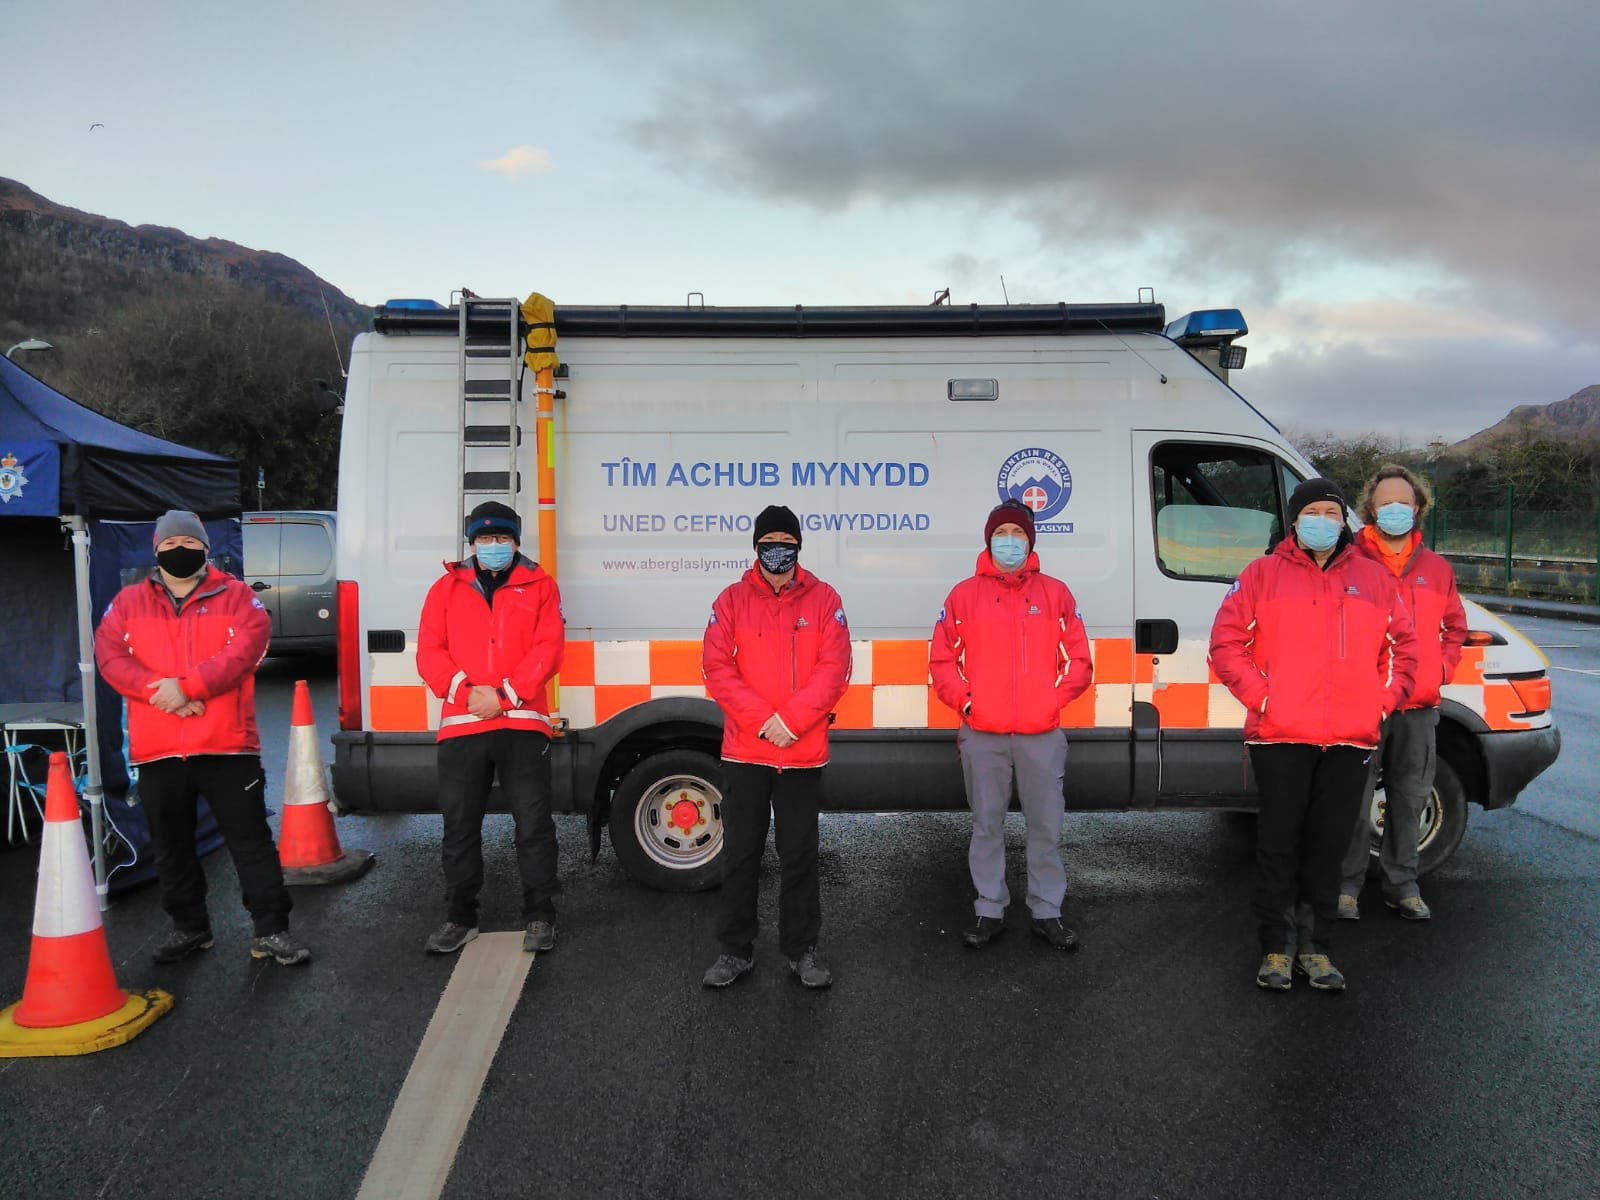 Aberglaslyn MRT volunteering to support the vaccination programme